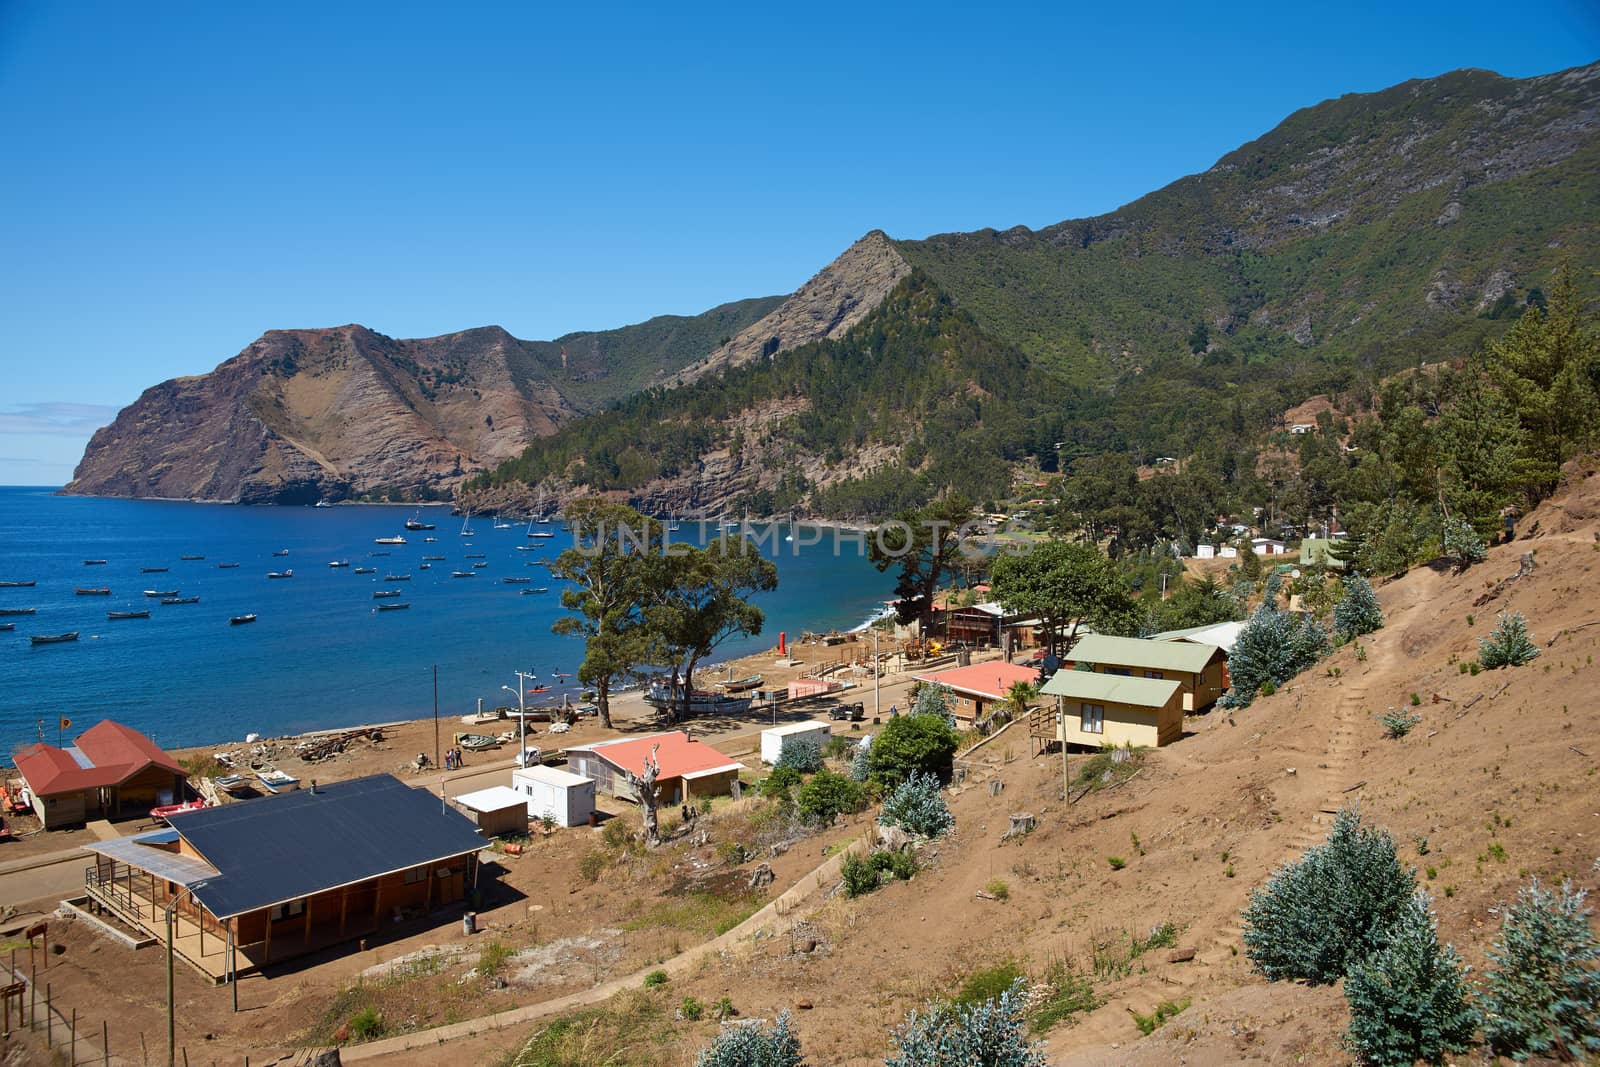 Cumberland Bay and the town of San Juan Bautista on Robinson Crusoe Island, one of three main islands making up the Juan Fernandez Islands some 400 miles off the coast of Chile.